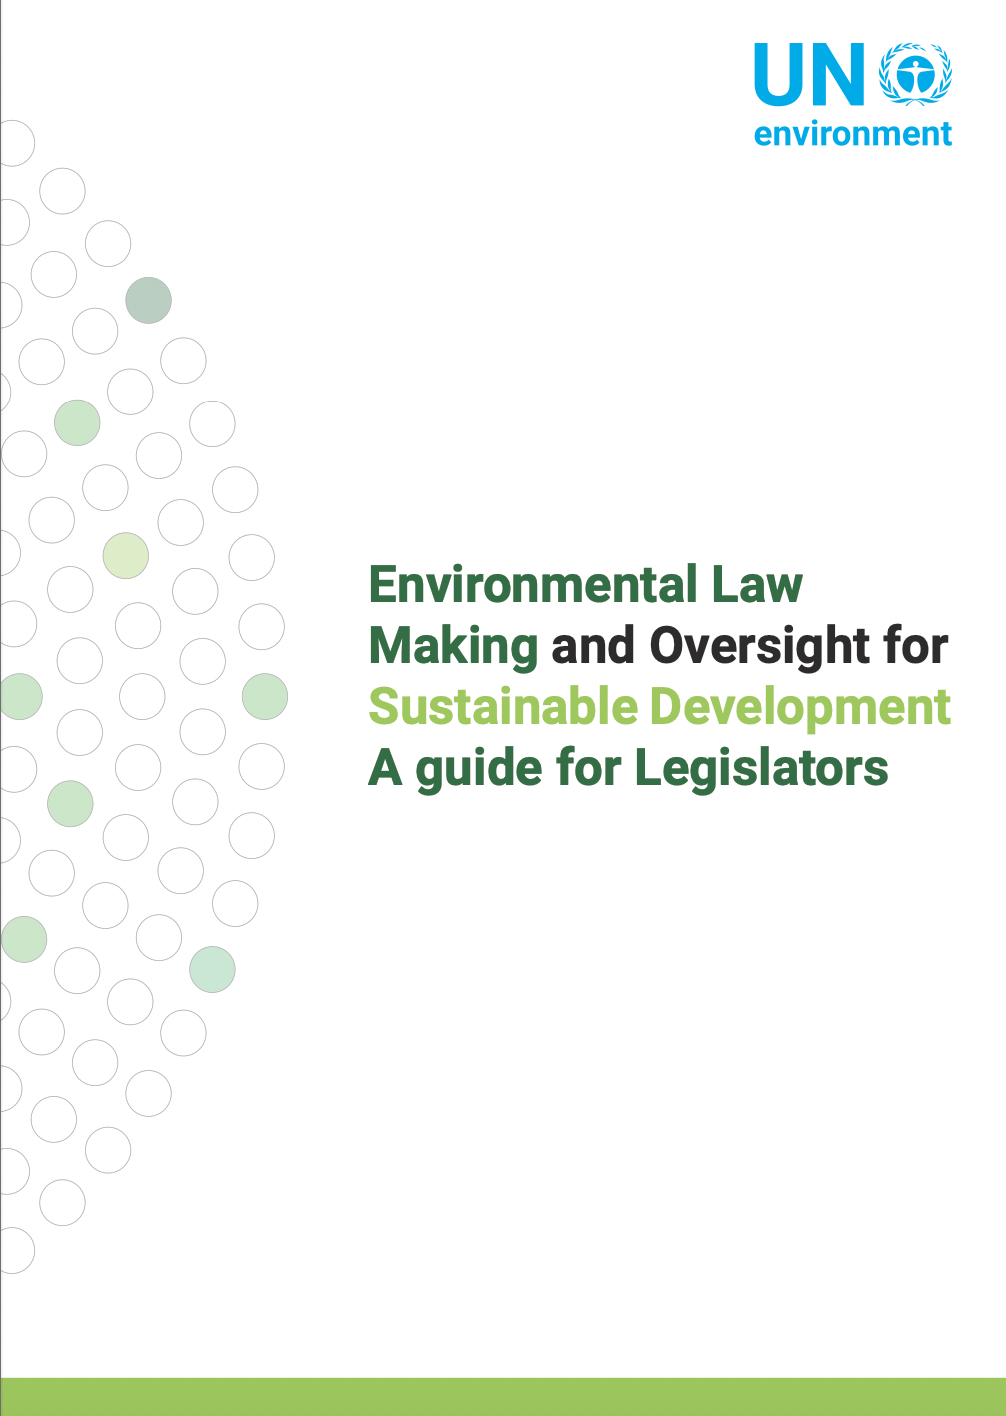 Environmental Law Making and Oversight for Sustainable Development: A guide for Legislators